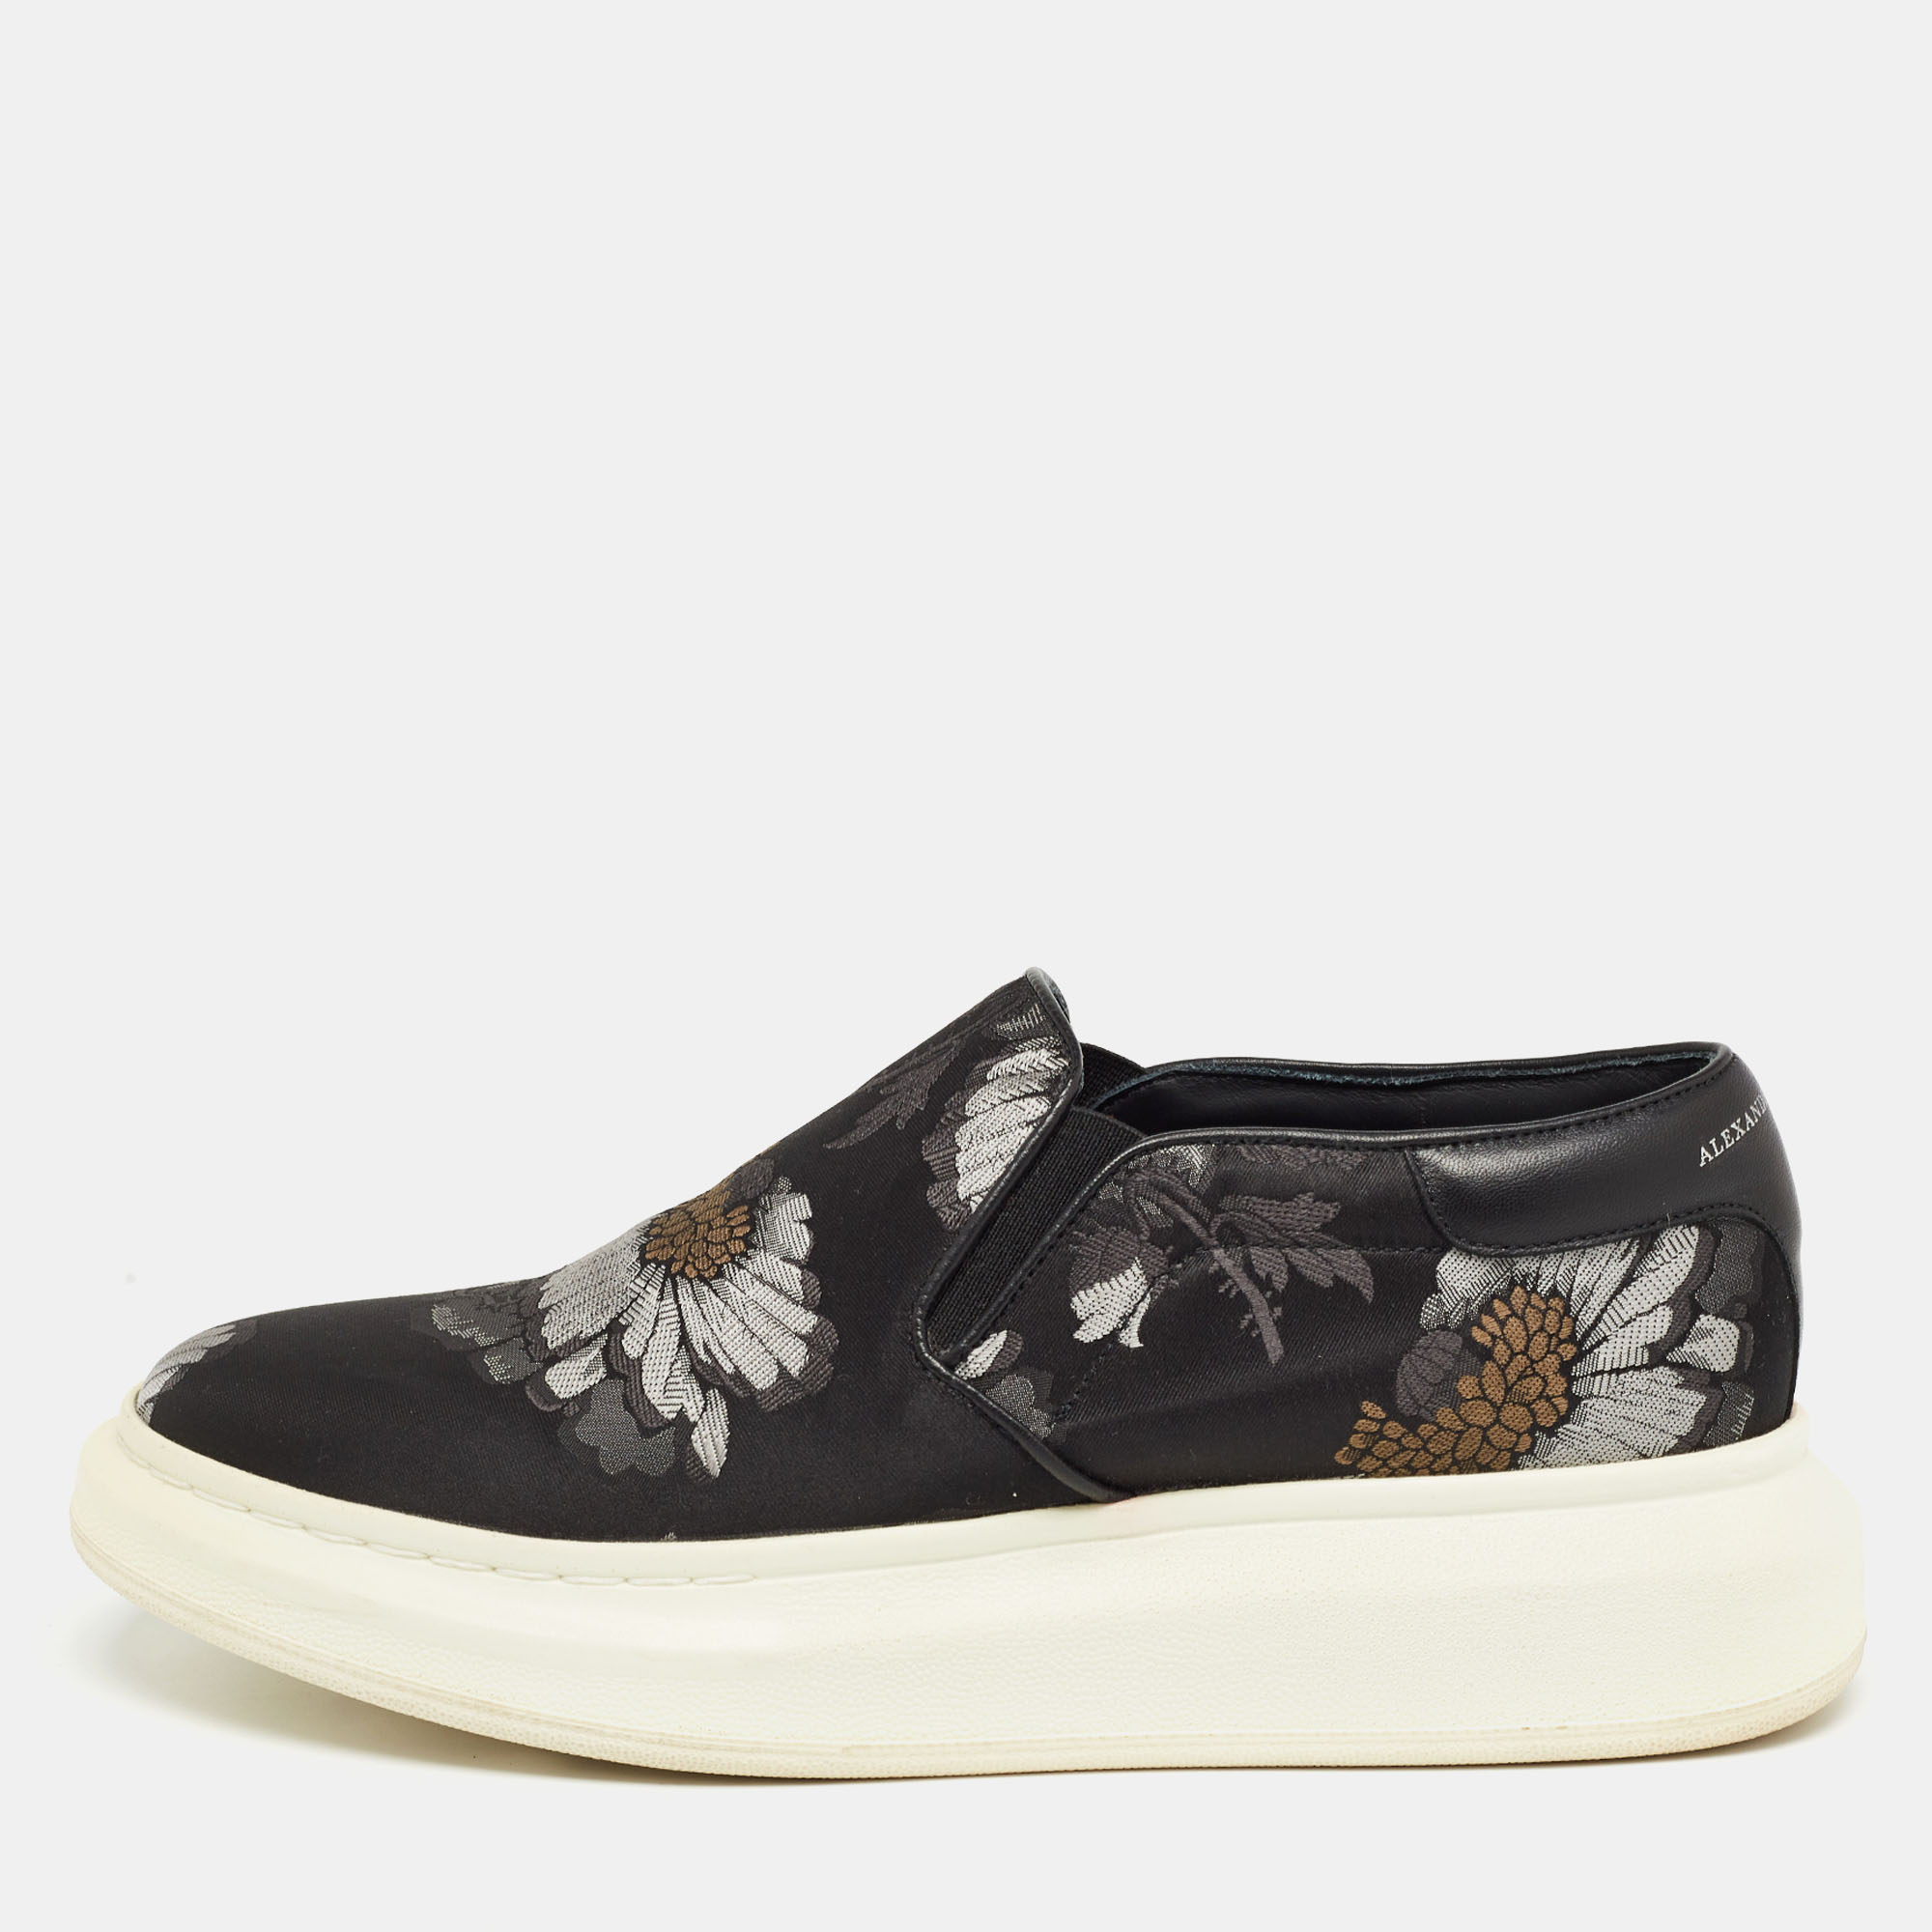 Pre-owned Alexander Mcqueen Black Floral Brocade Fabric Slip On Trainers Size 40